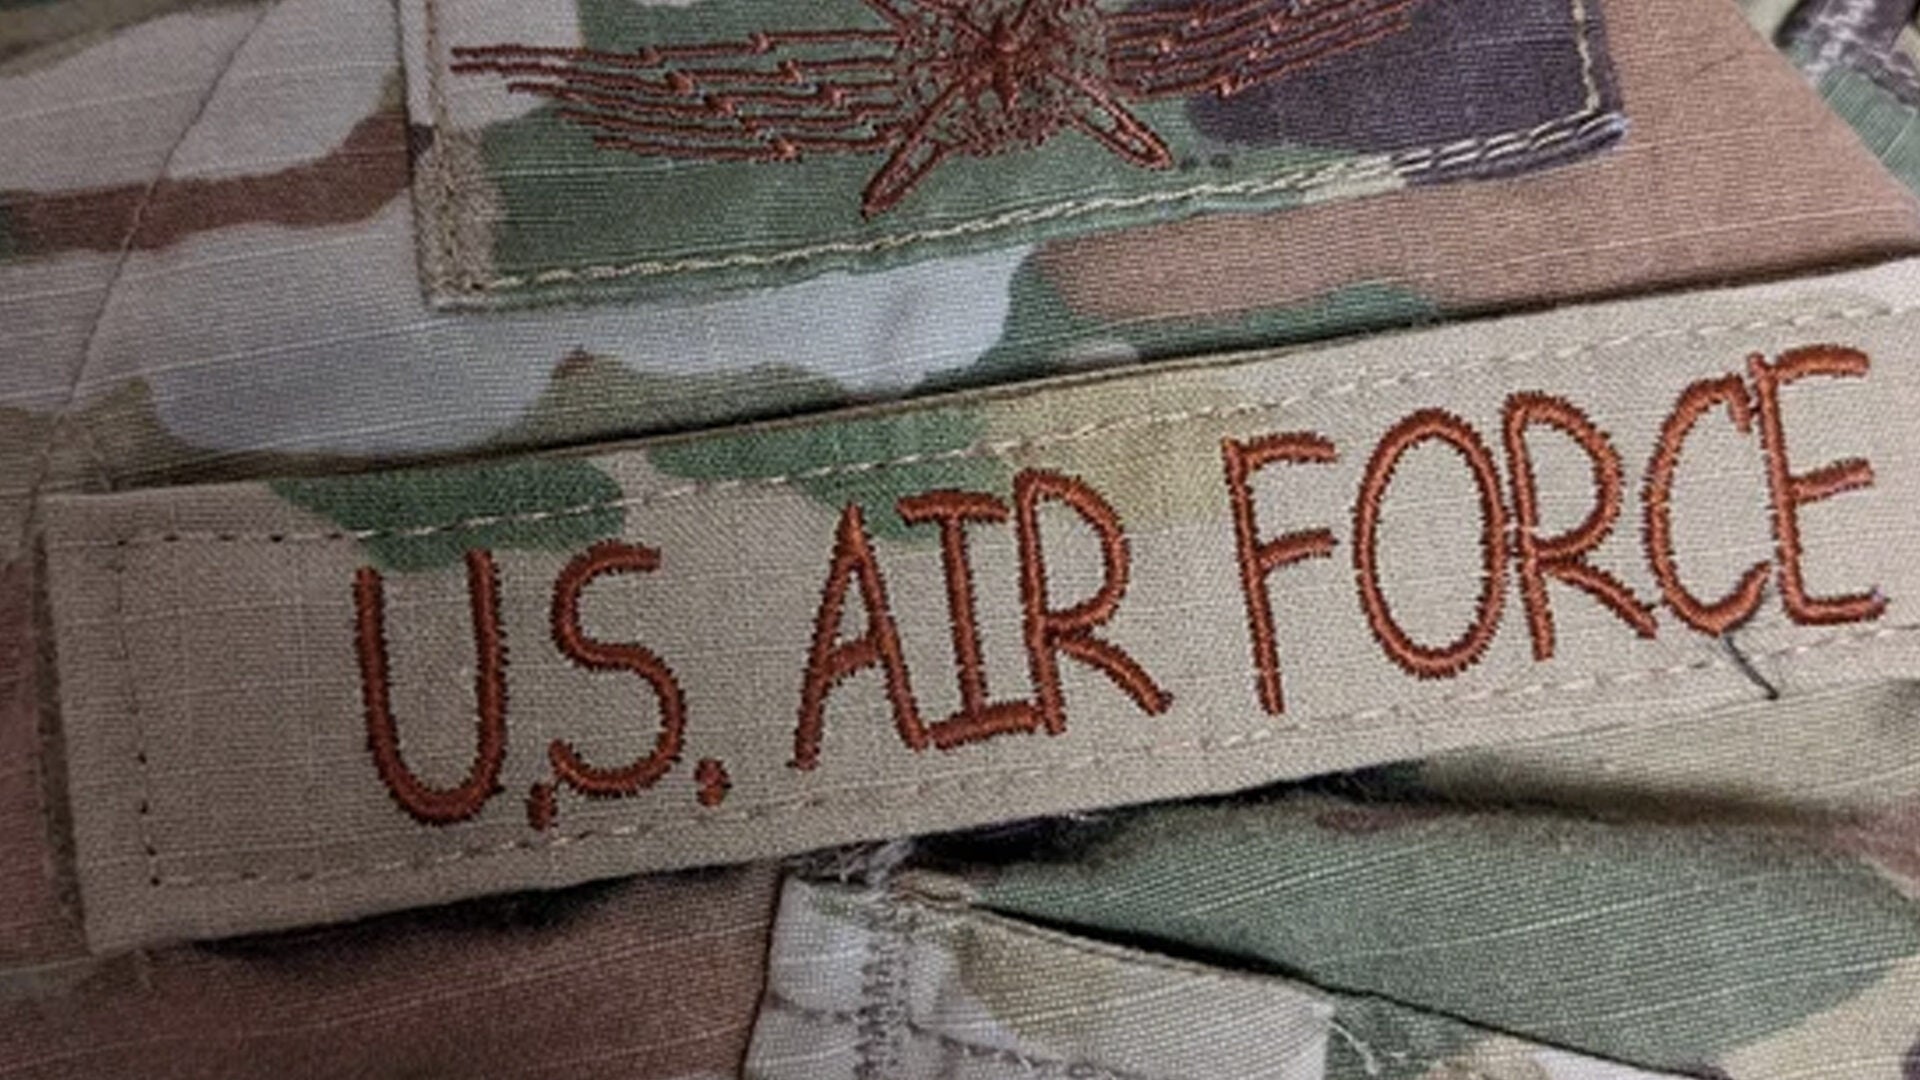 Airmen with Comic Sans name tapes test the limits of Air Force ...